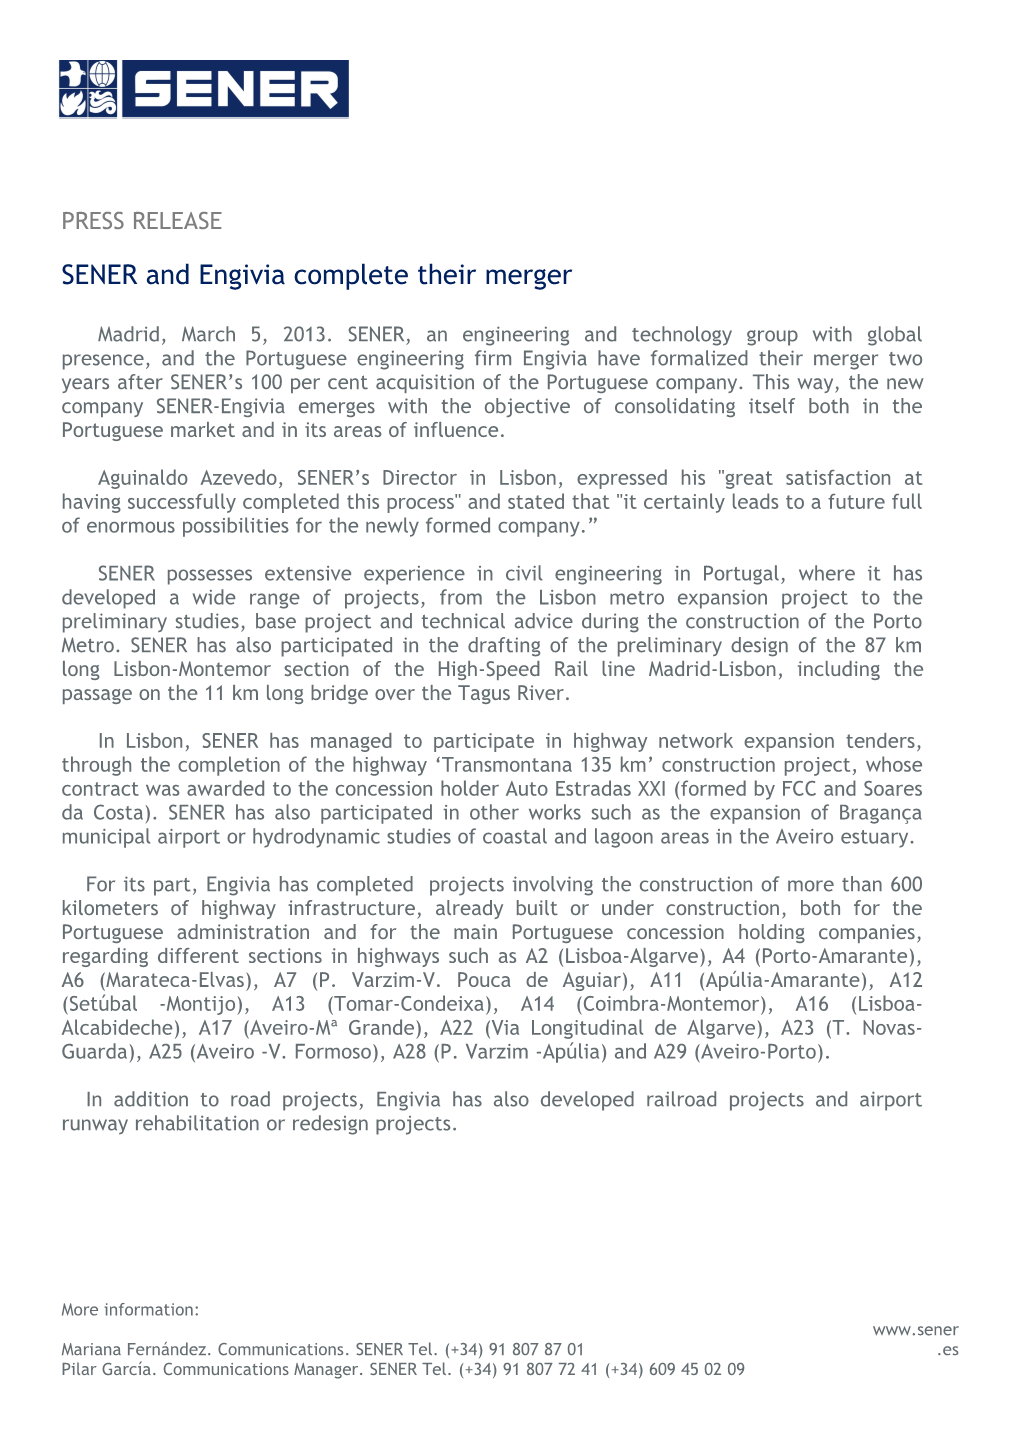 SENER and Engivia Complete Their Merger